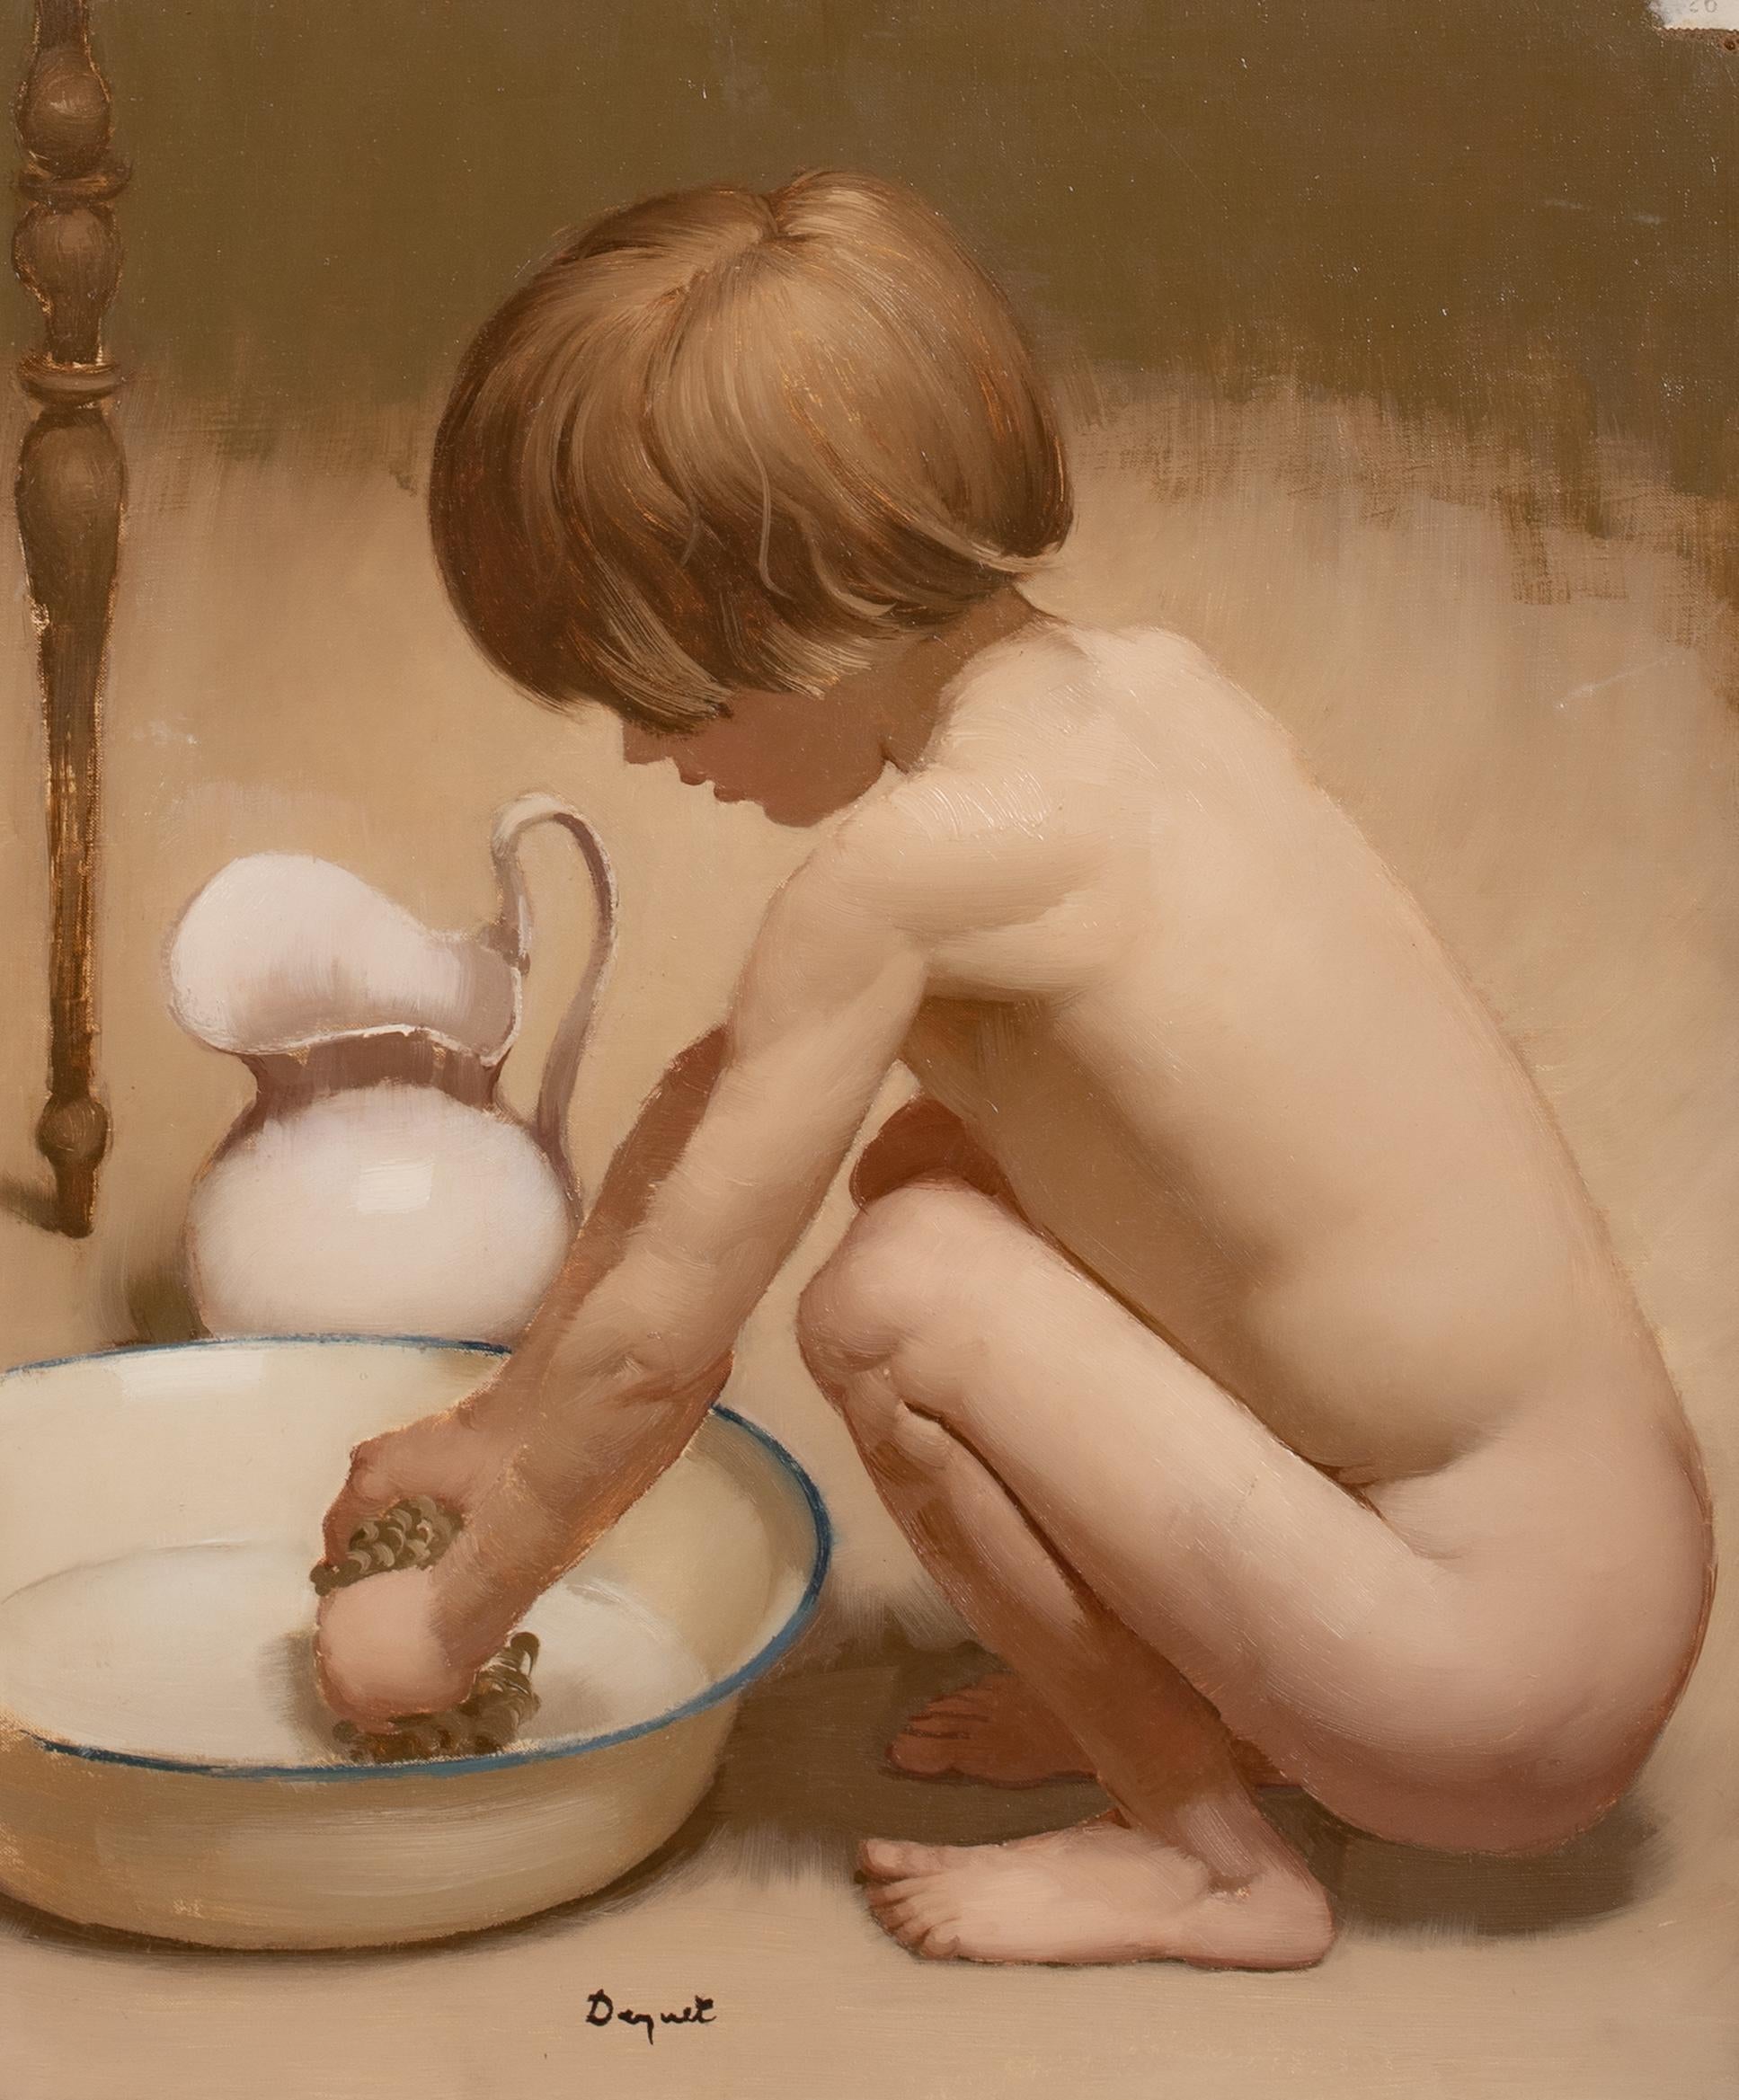 Nude Boy Bathing, early 20th Century

French School - signed indistinctly

Large early 20th Century French School portrait of a young boy preparing to bath himself, oil on canvas signed indistinctly. Excellent quality and condition presented in a